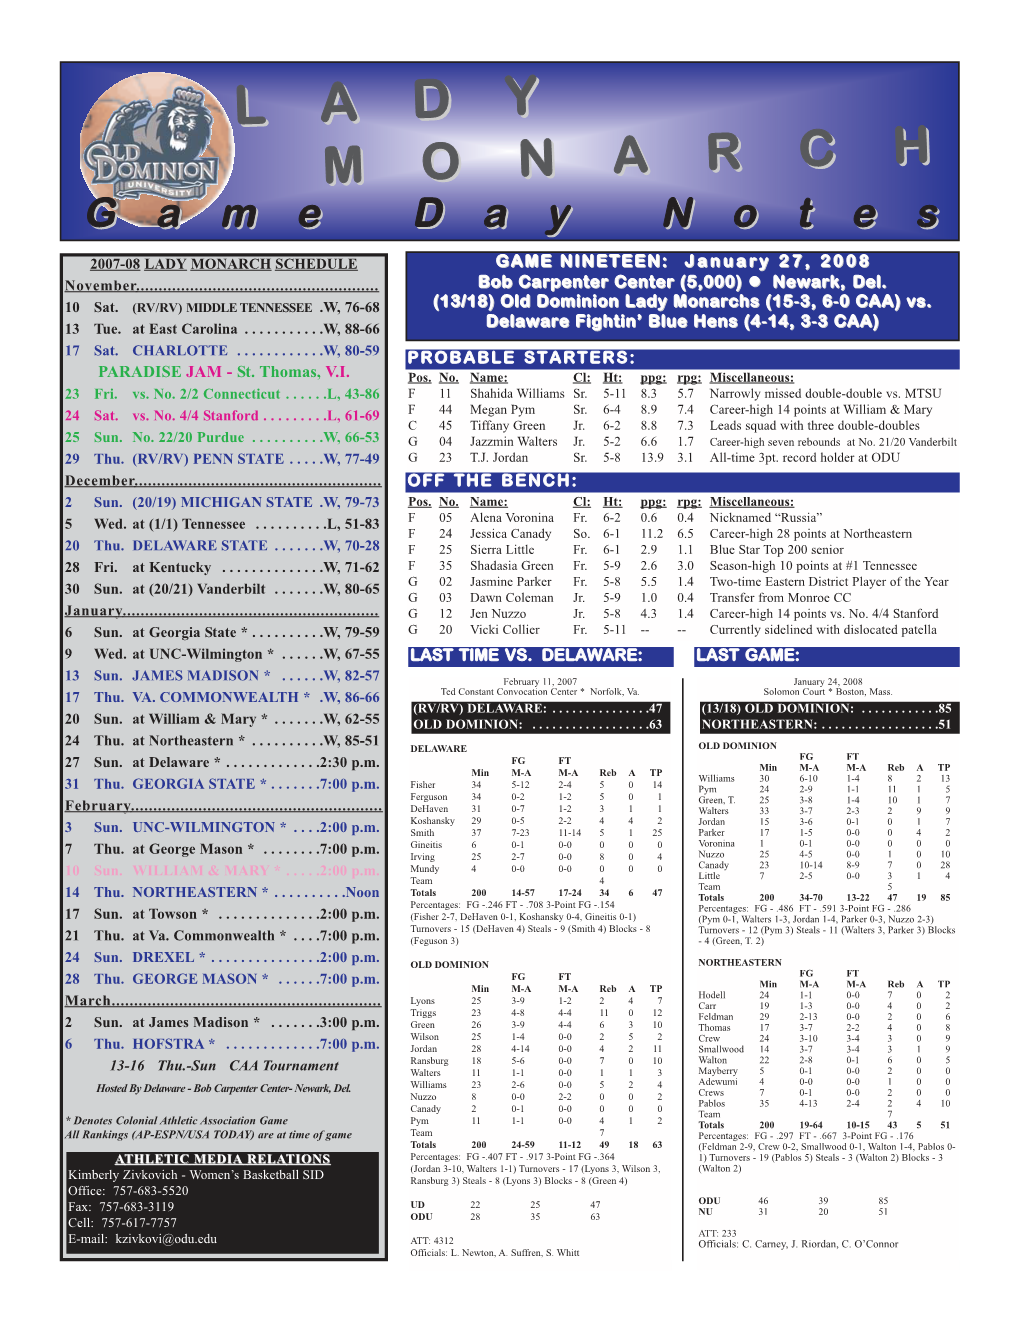 Delaware Game Notes.Qxd